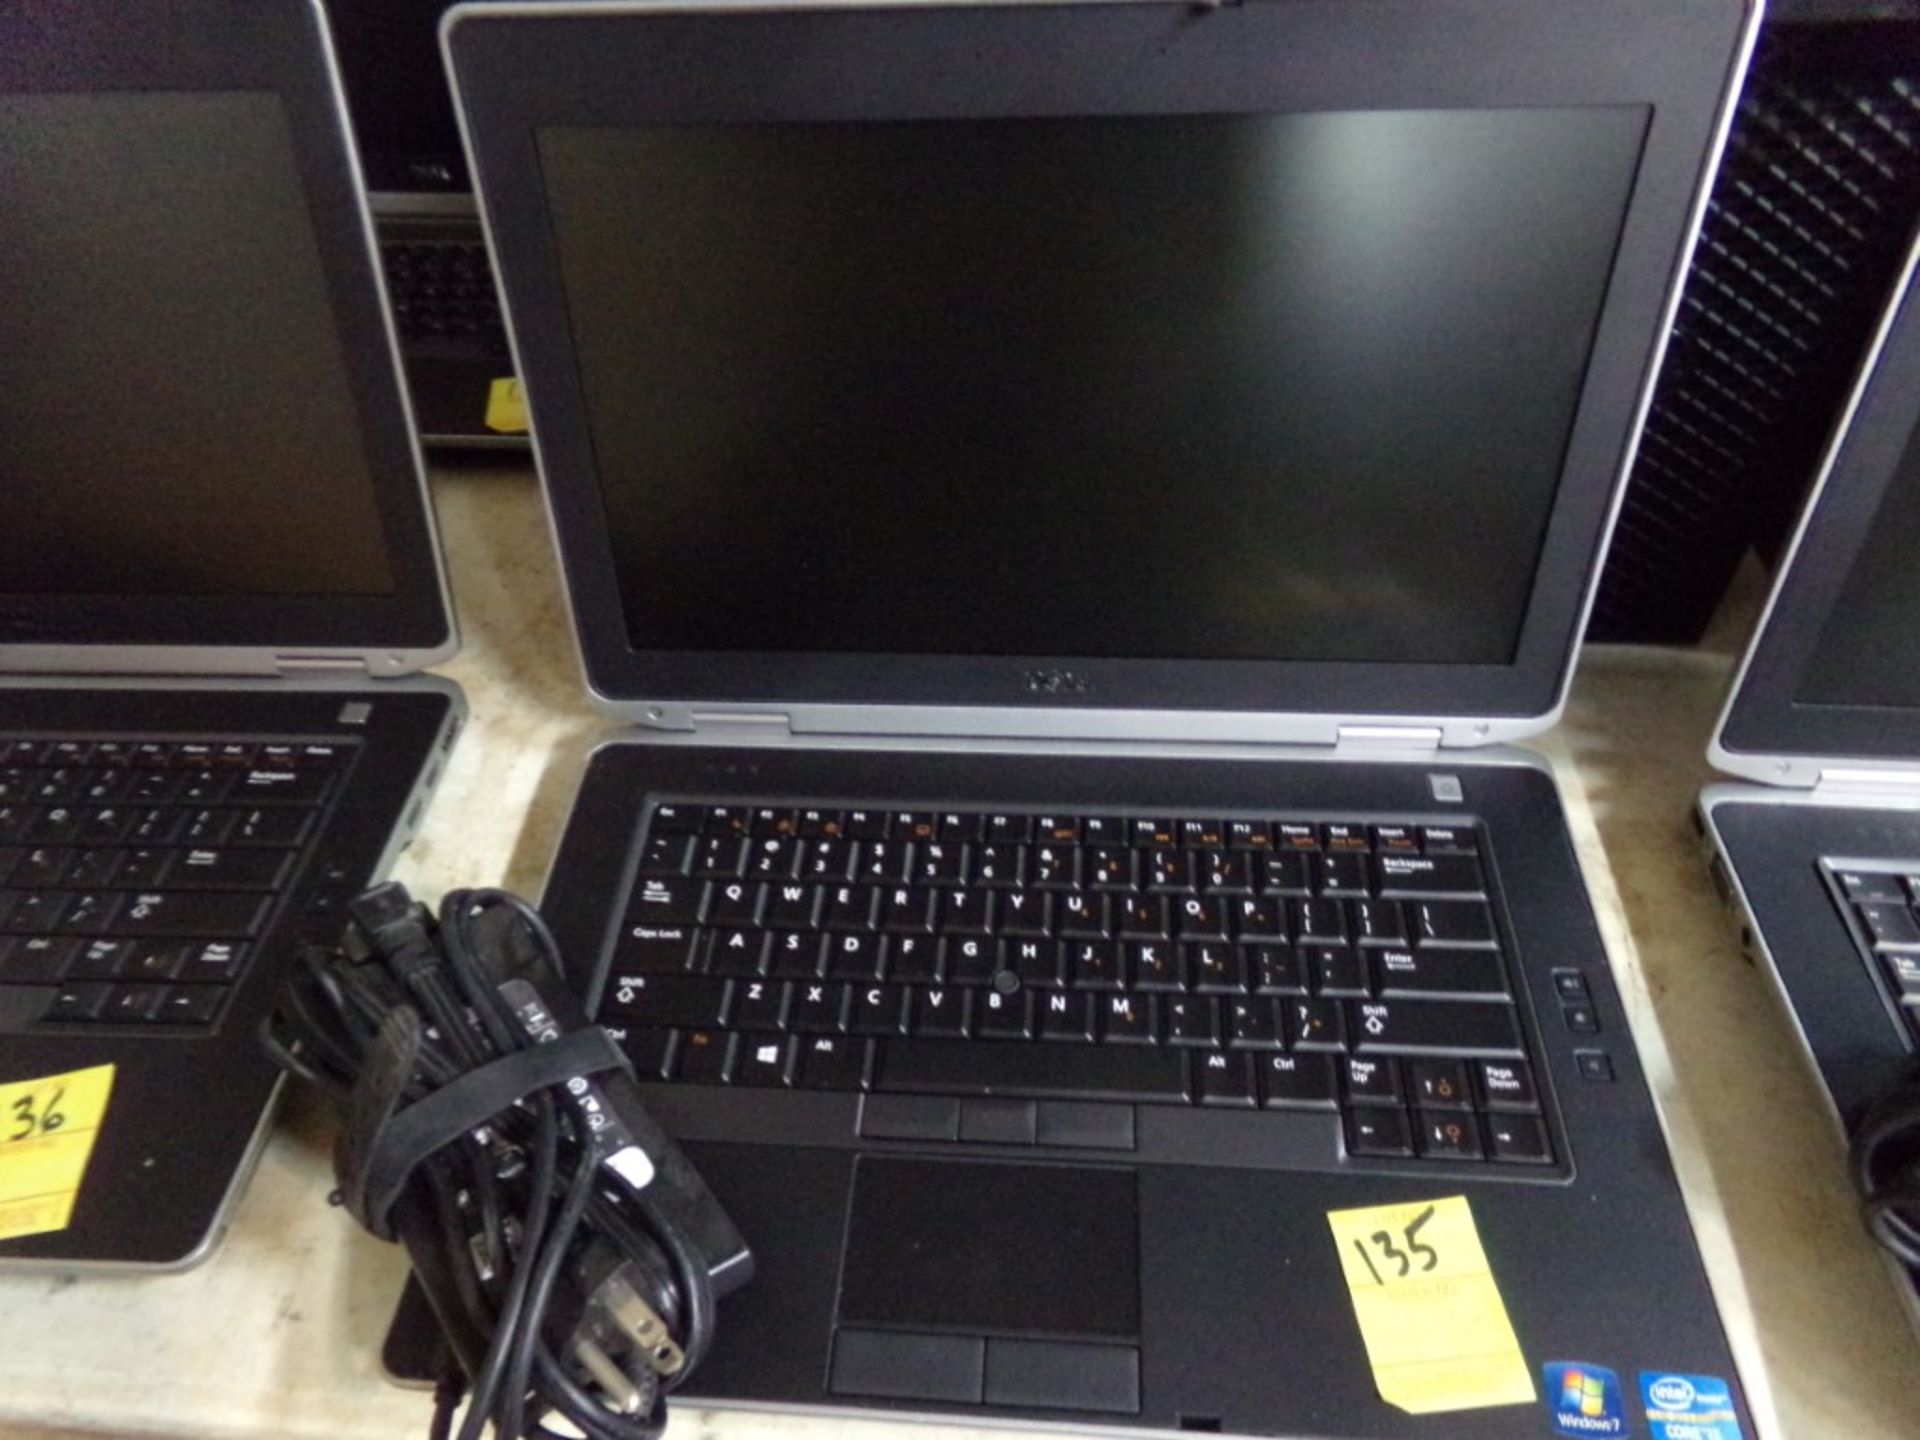 Dell Latitude E6430 Laptop with Power Supply & New Battery, CPU i3-3120M, Ram 4GM DDR3, HDD 320GB,